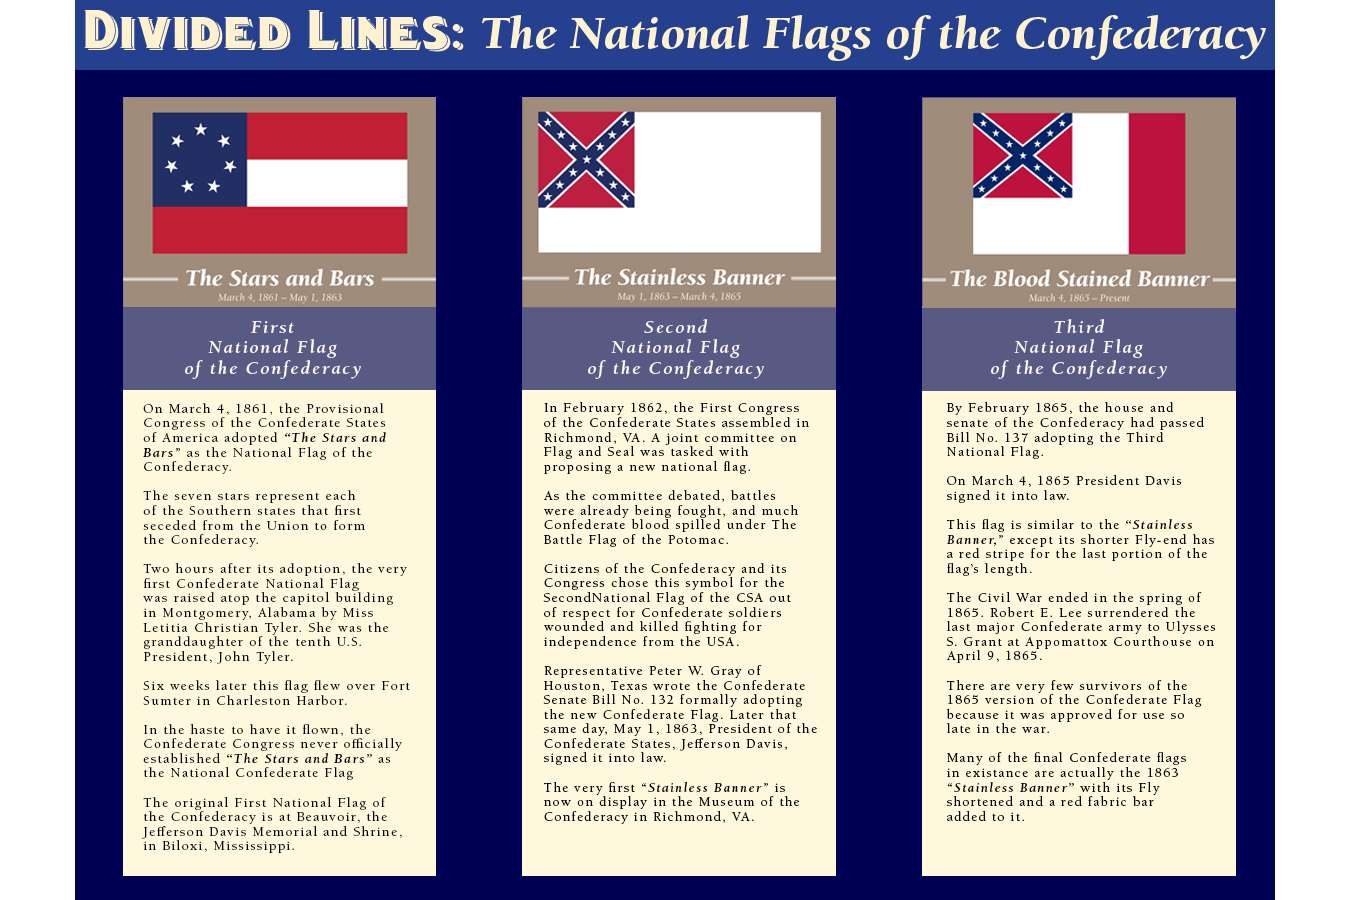 DMFAH 3 CFLAG 3 flags : There were 3 different Flags used by the Confederacy during the Civil War. As the war progressed the Confederate flag evolved to reflect changing attitudes and practical use of the banner